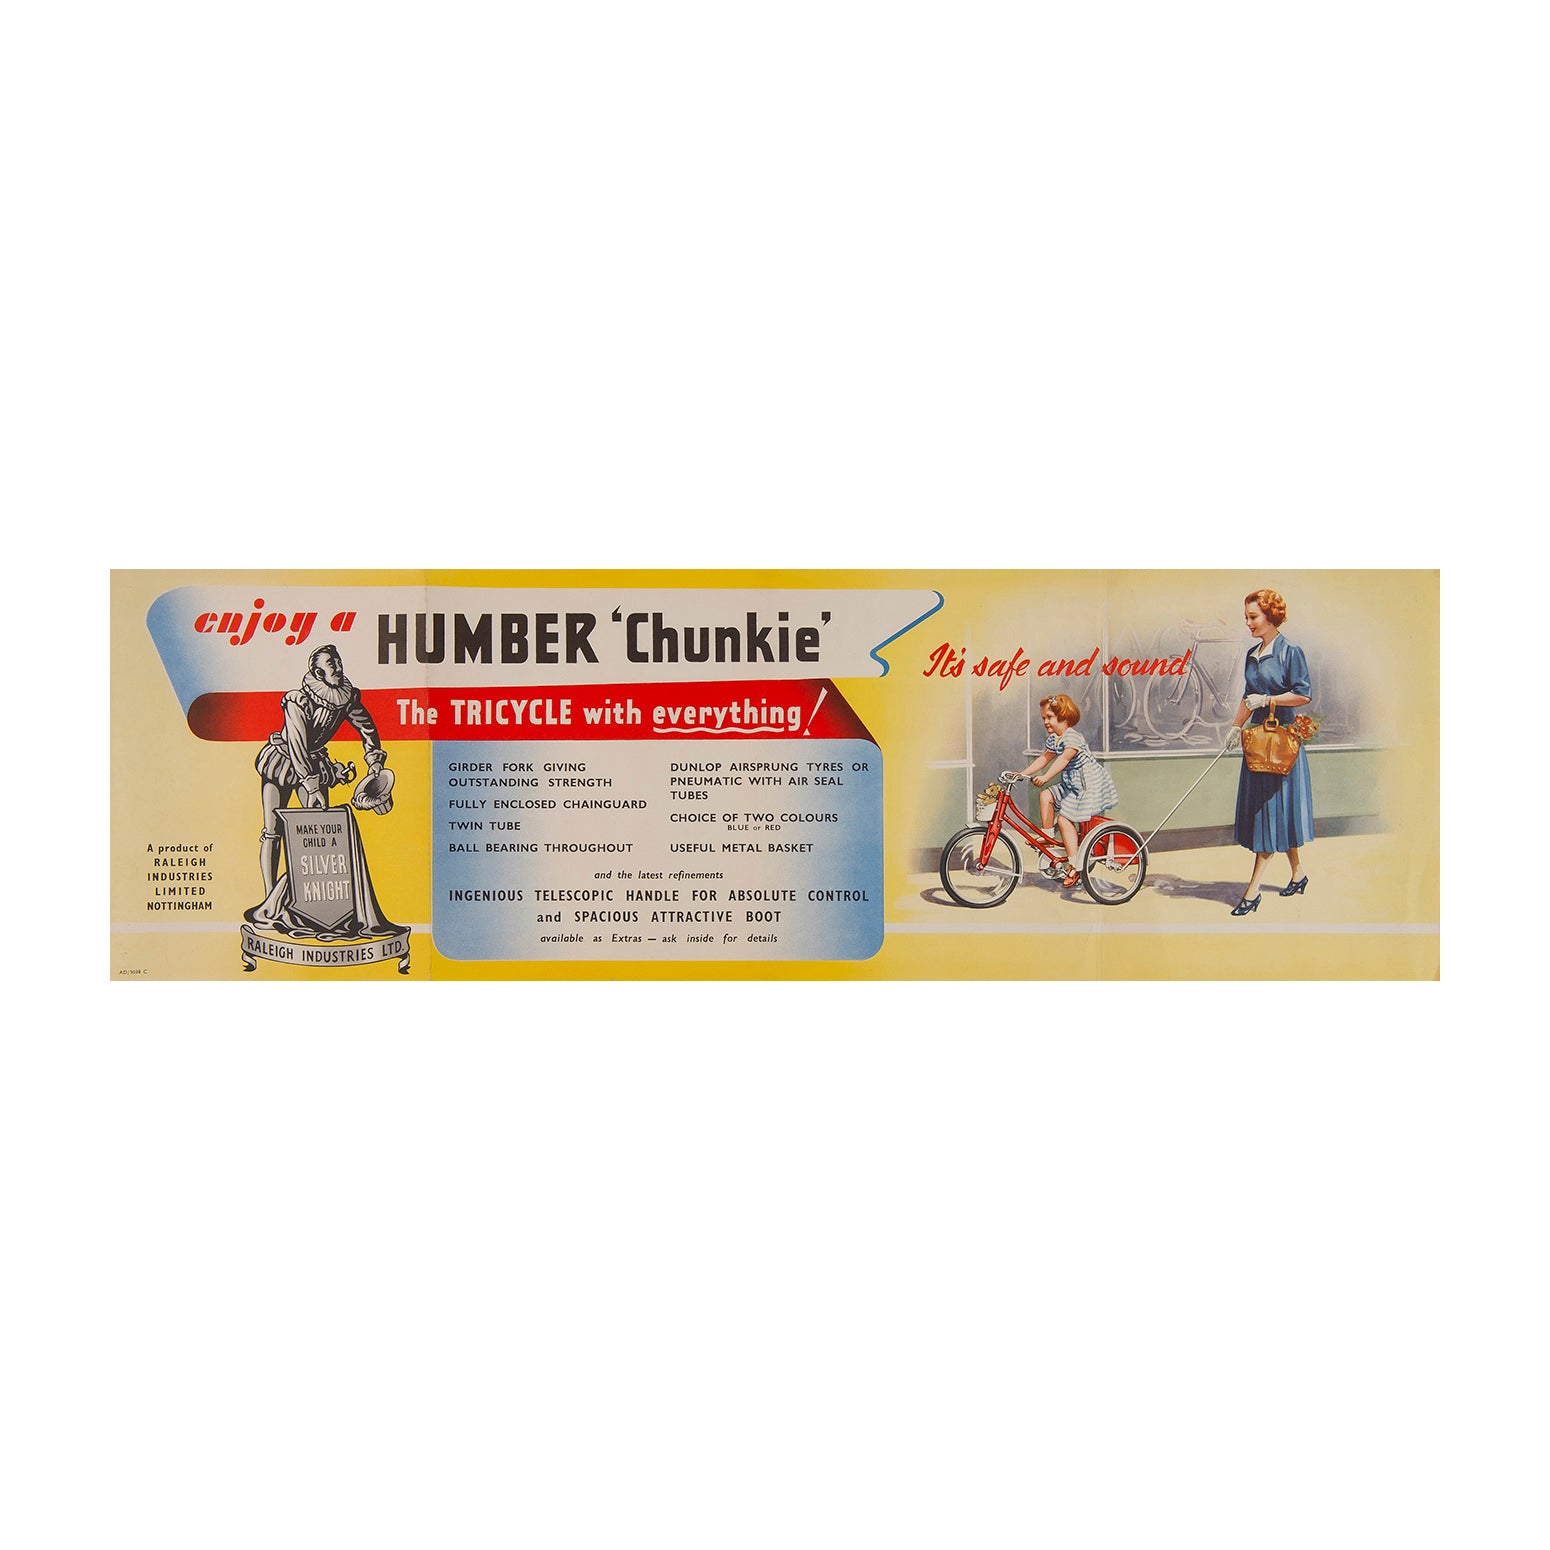 Enjoy a Humber 'Chunkie' - The Tricycle with everything!